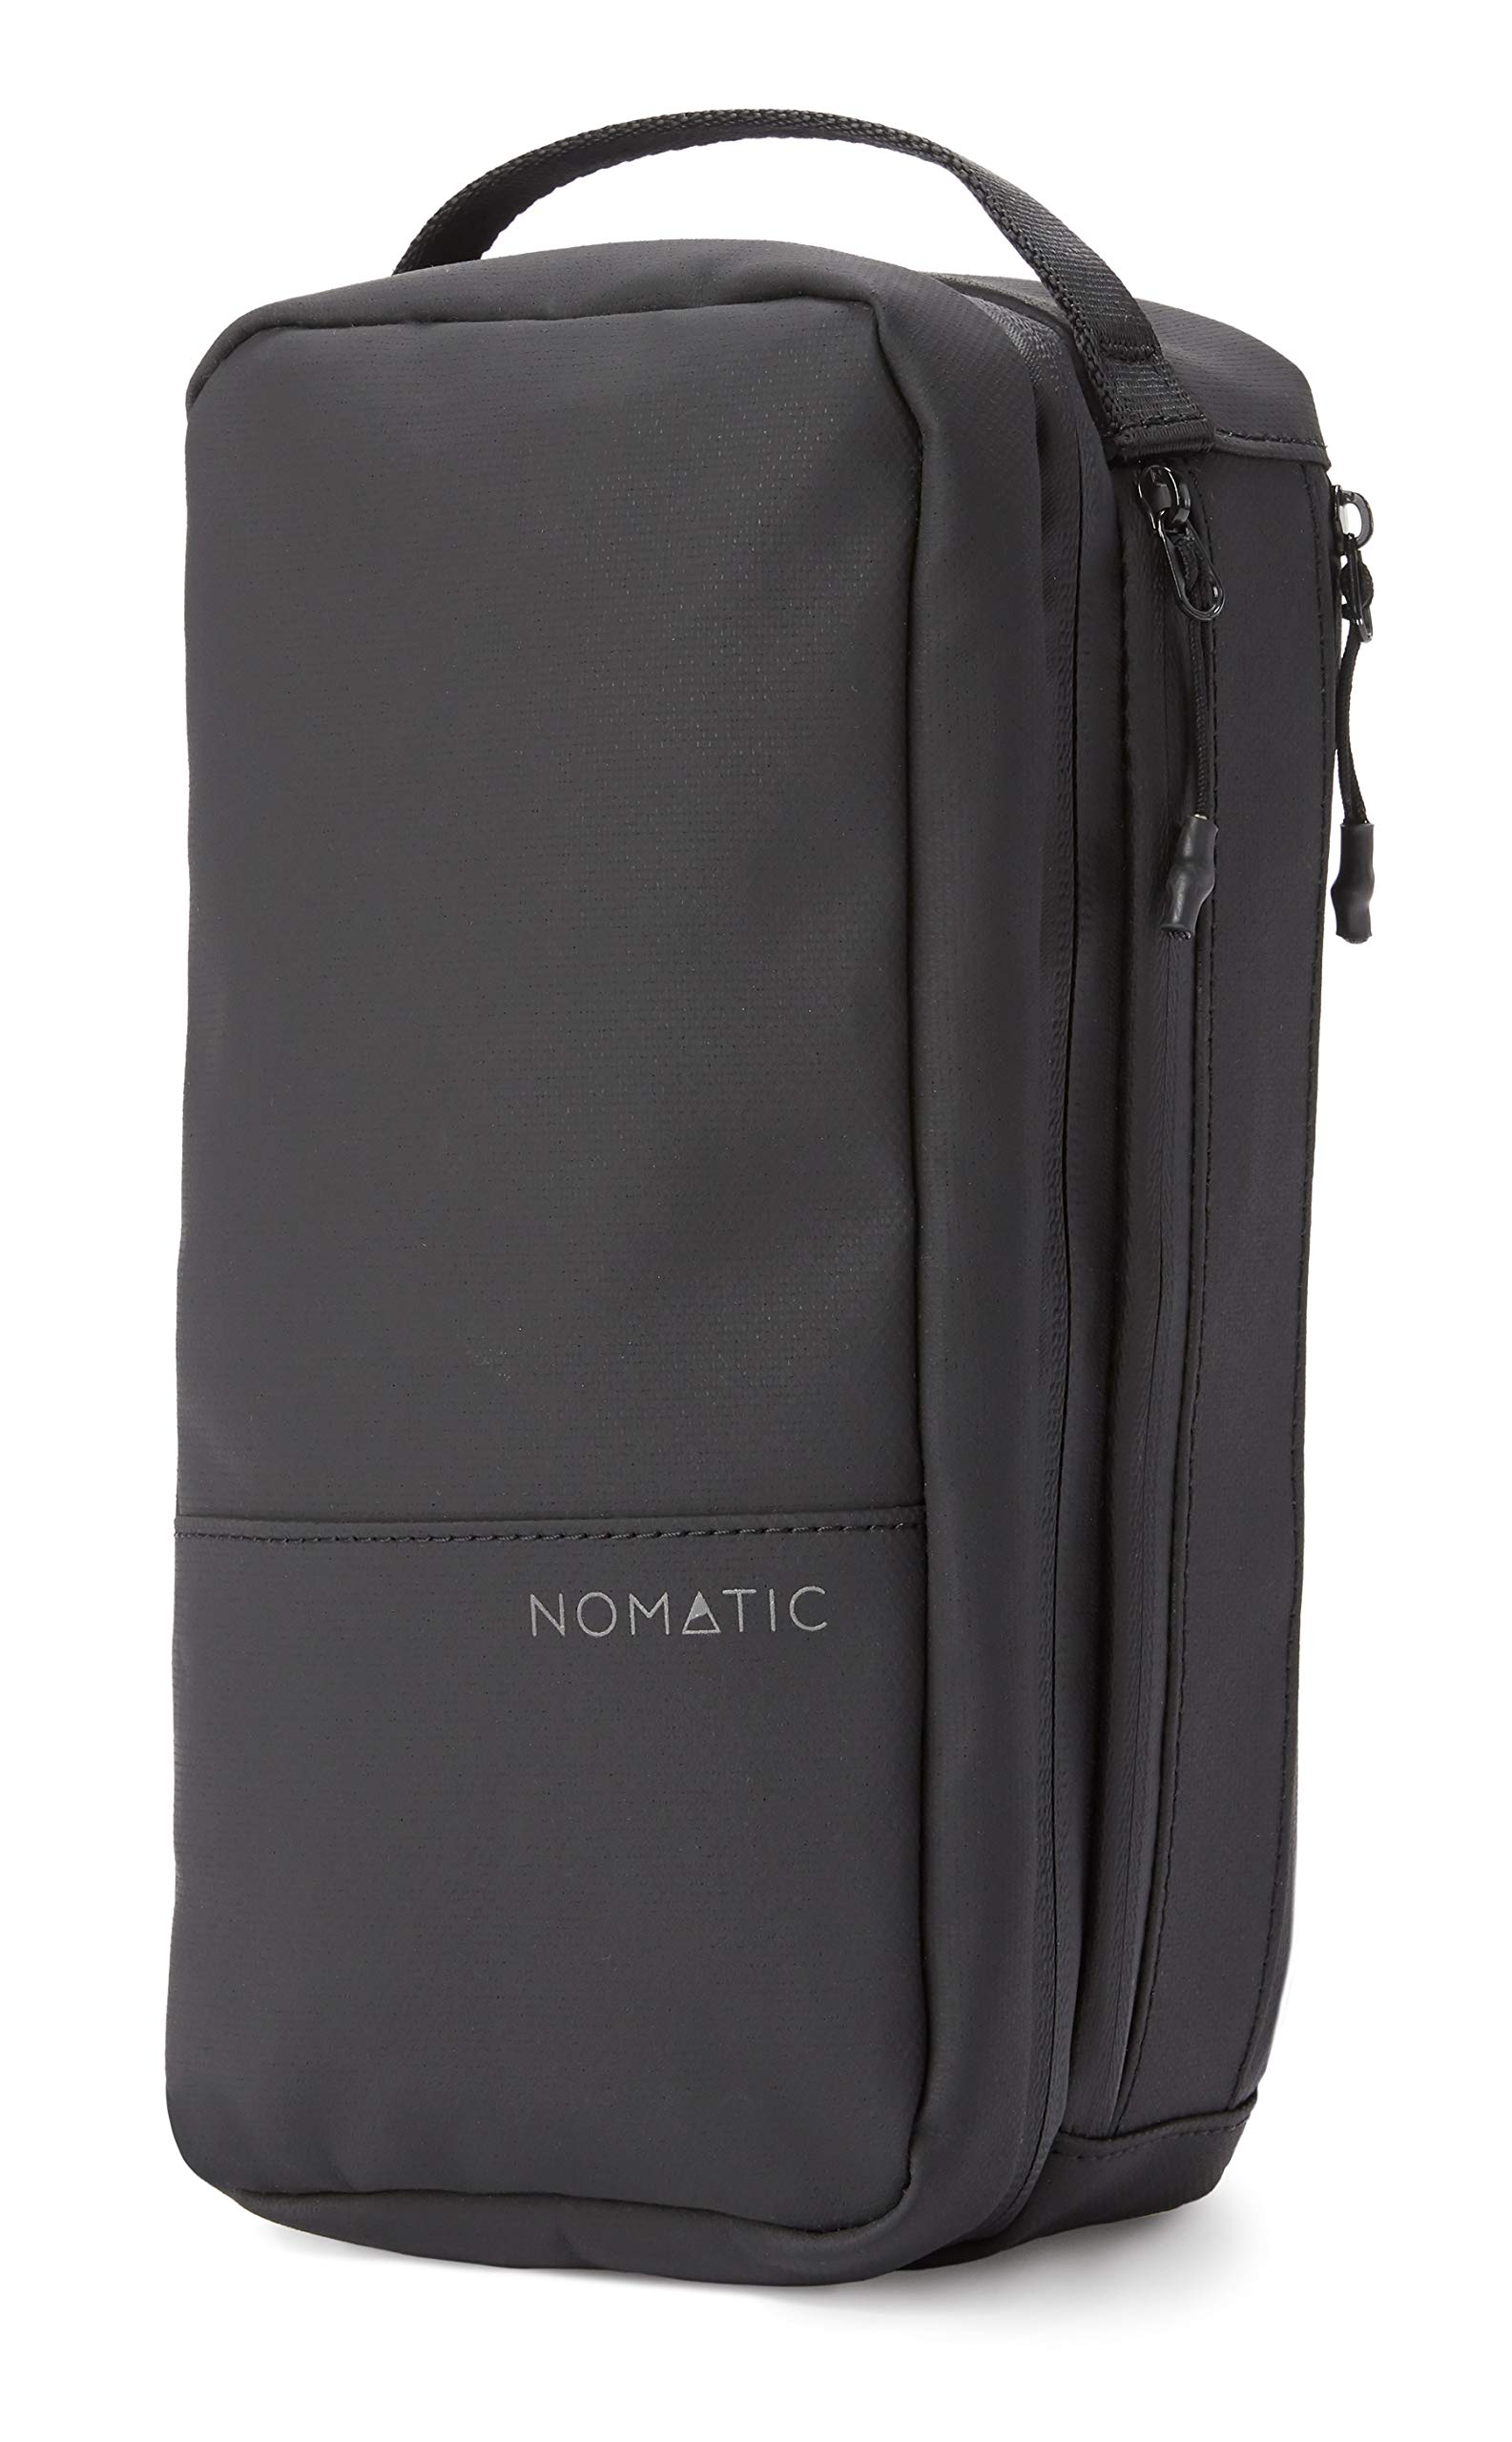 NOMATIC- Toiletry Wash Bag for Travel, Mens and Women's Toiletries Bag, Water Resistant Storage Case for Shaving Kit, Makeup, Toiletries (Black), Large V2